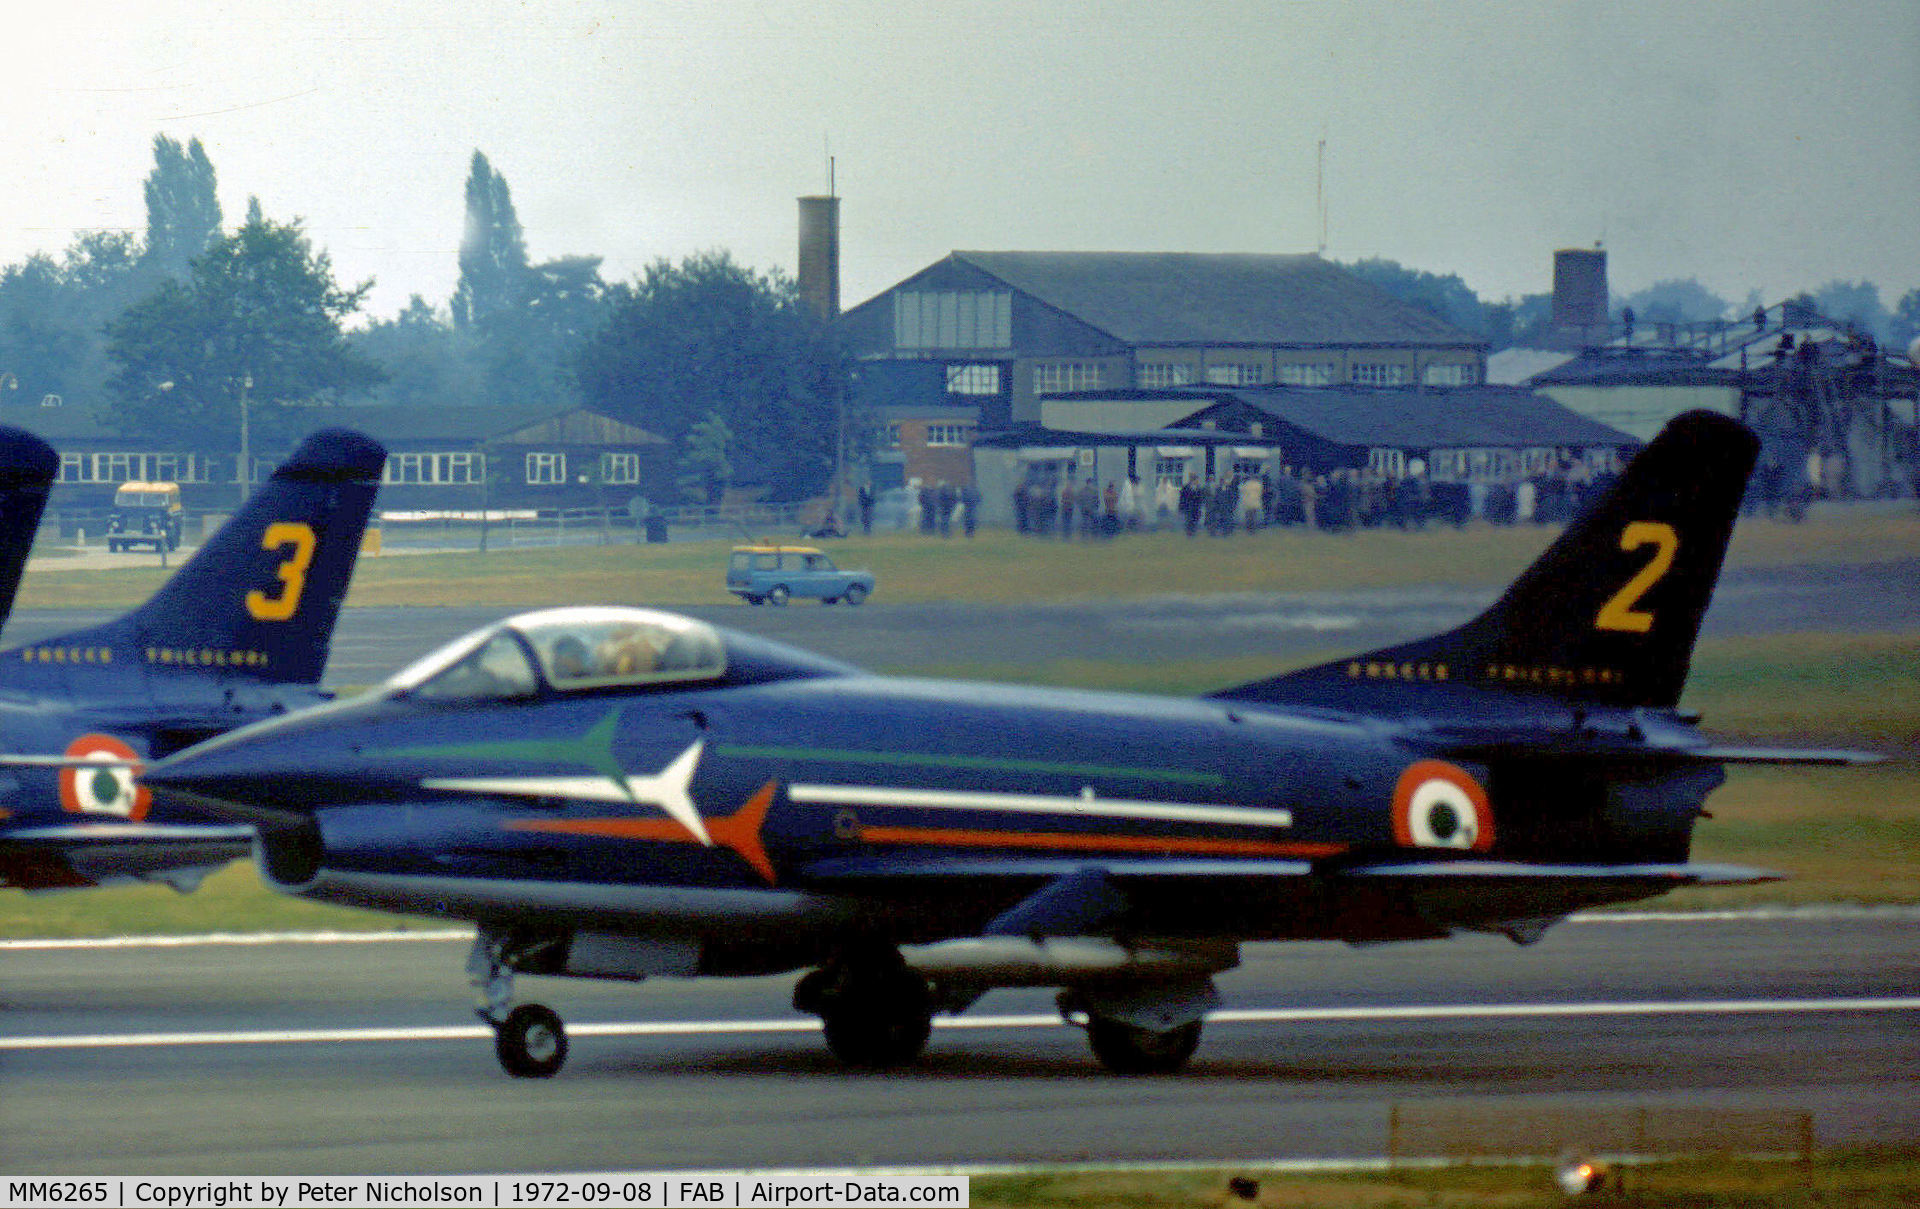 MM6265, Fiat G-91PAN C/N 31, Fiat G-91PAN number 2 of the Italian Air Force's demonstration team Frecce Tricolori at the 1972 Farnborough Airshow.